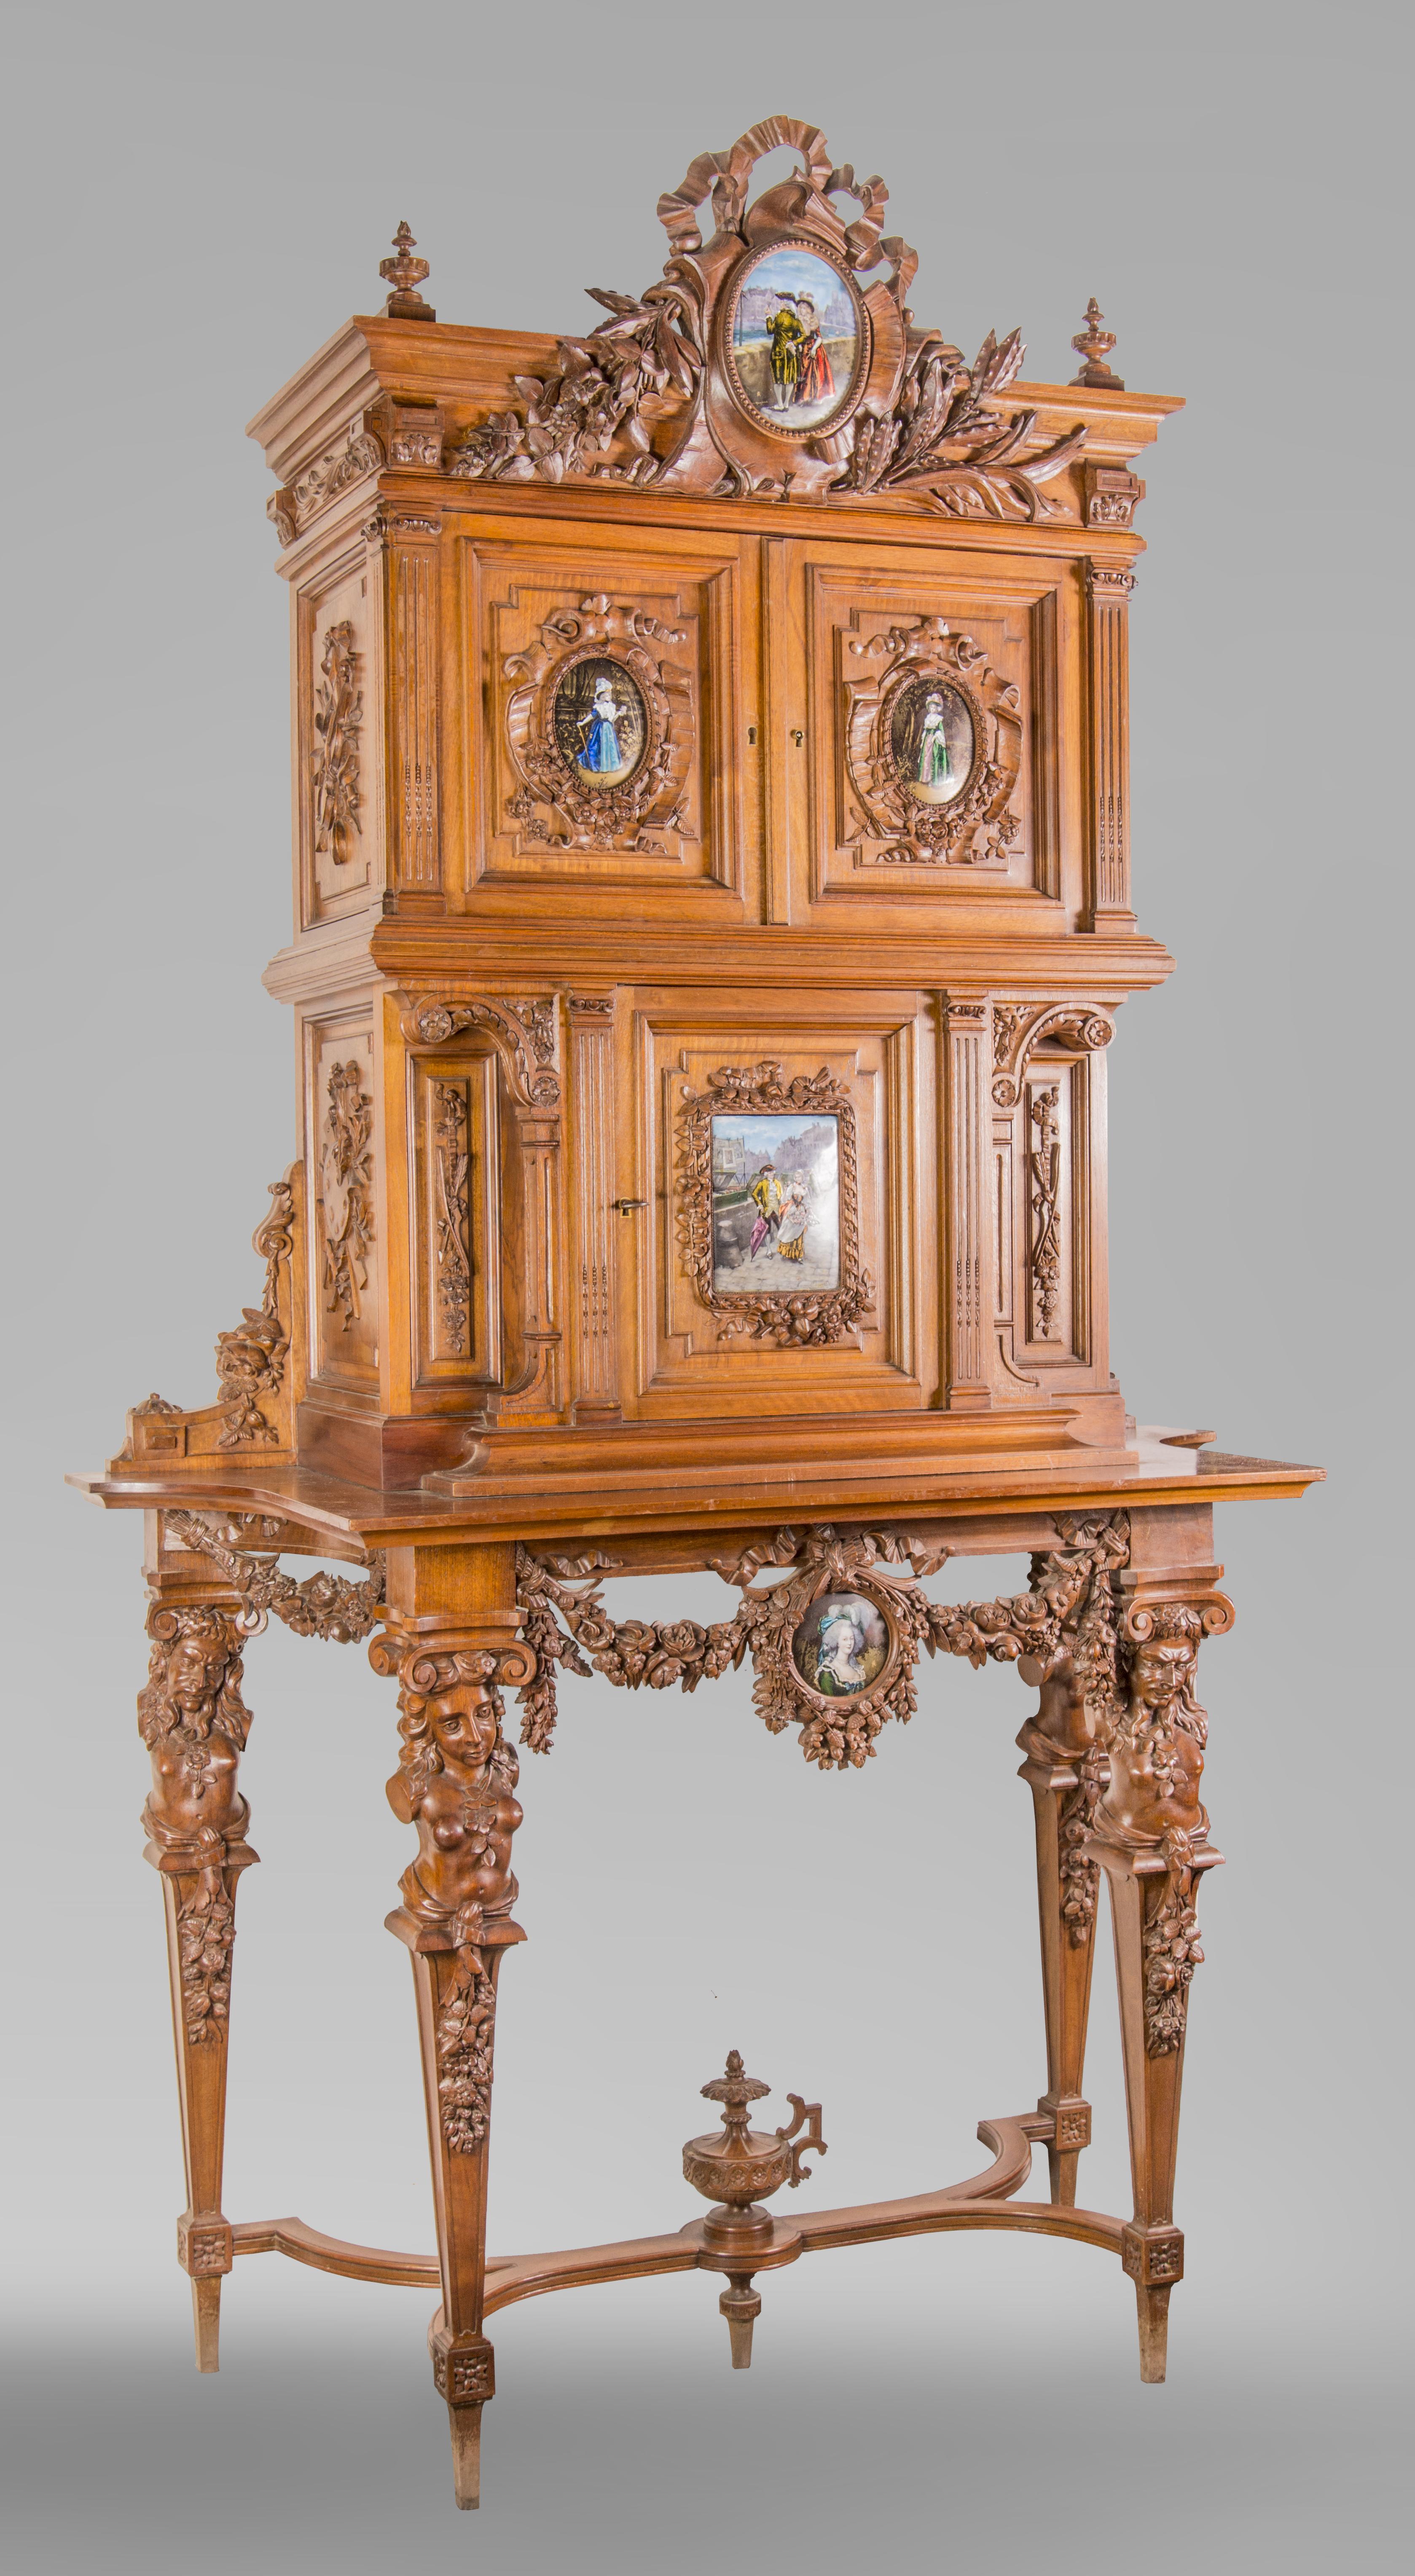 Beautiful Napoleon III style walnut cabinet, richly carved, made in the second half of the 19th century. The carved decoration is very detailed, refined, and of high quality.
Five enamelled plates adorn the doors, apron and pediment of this